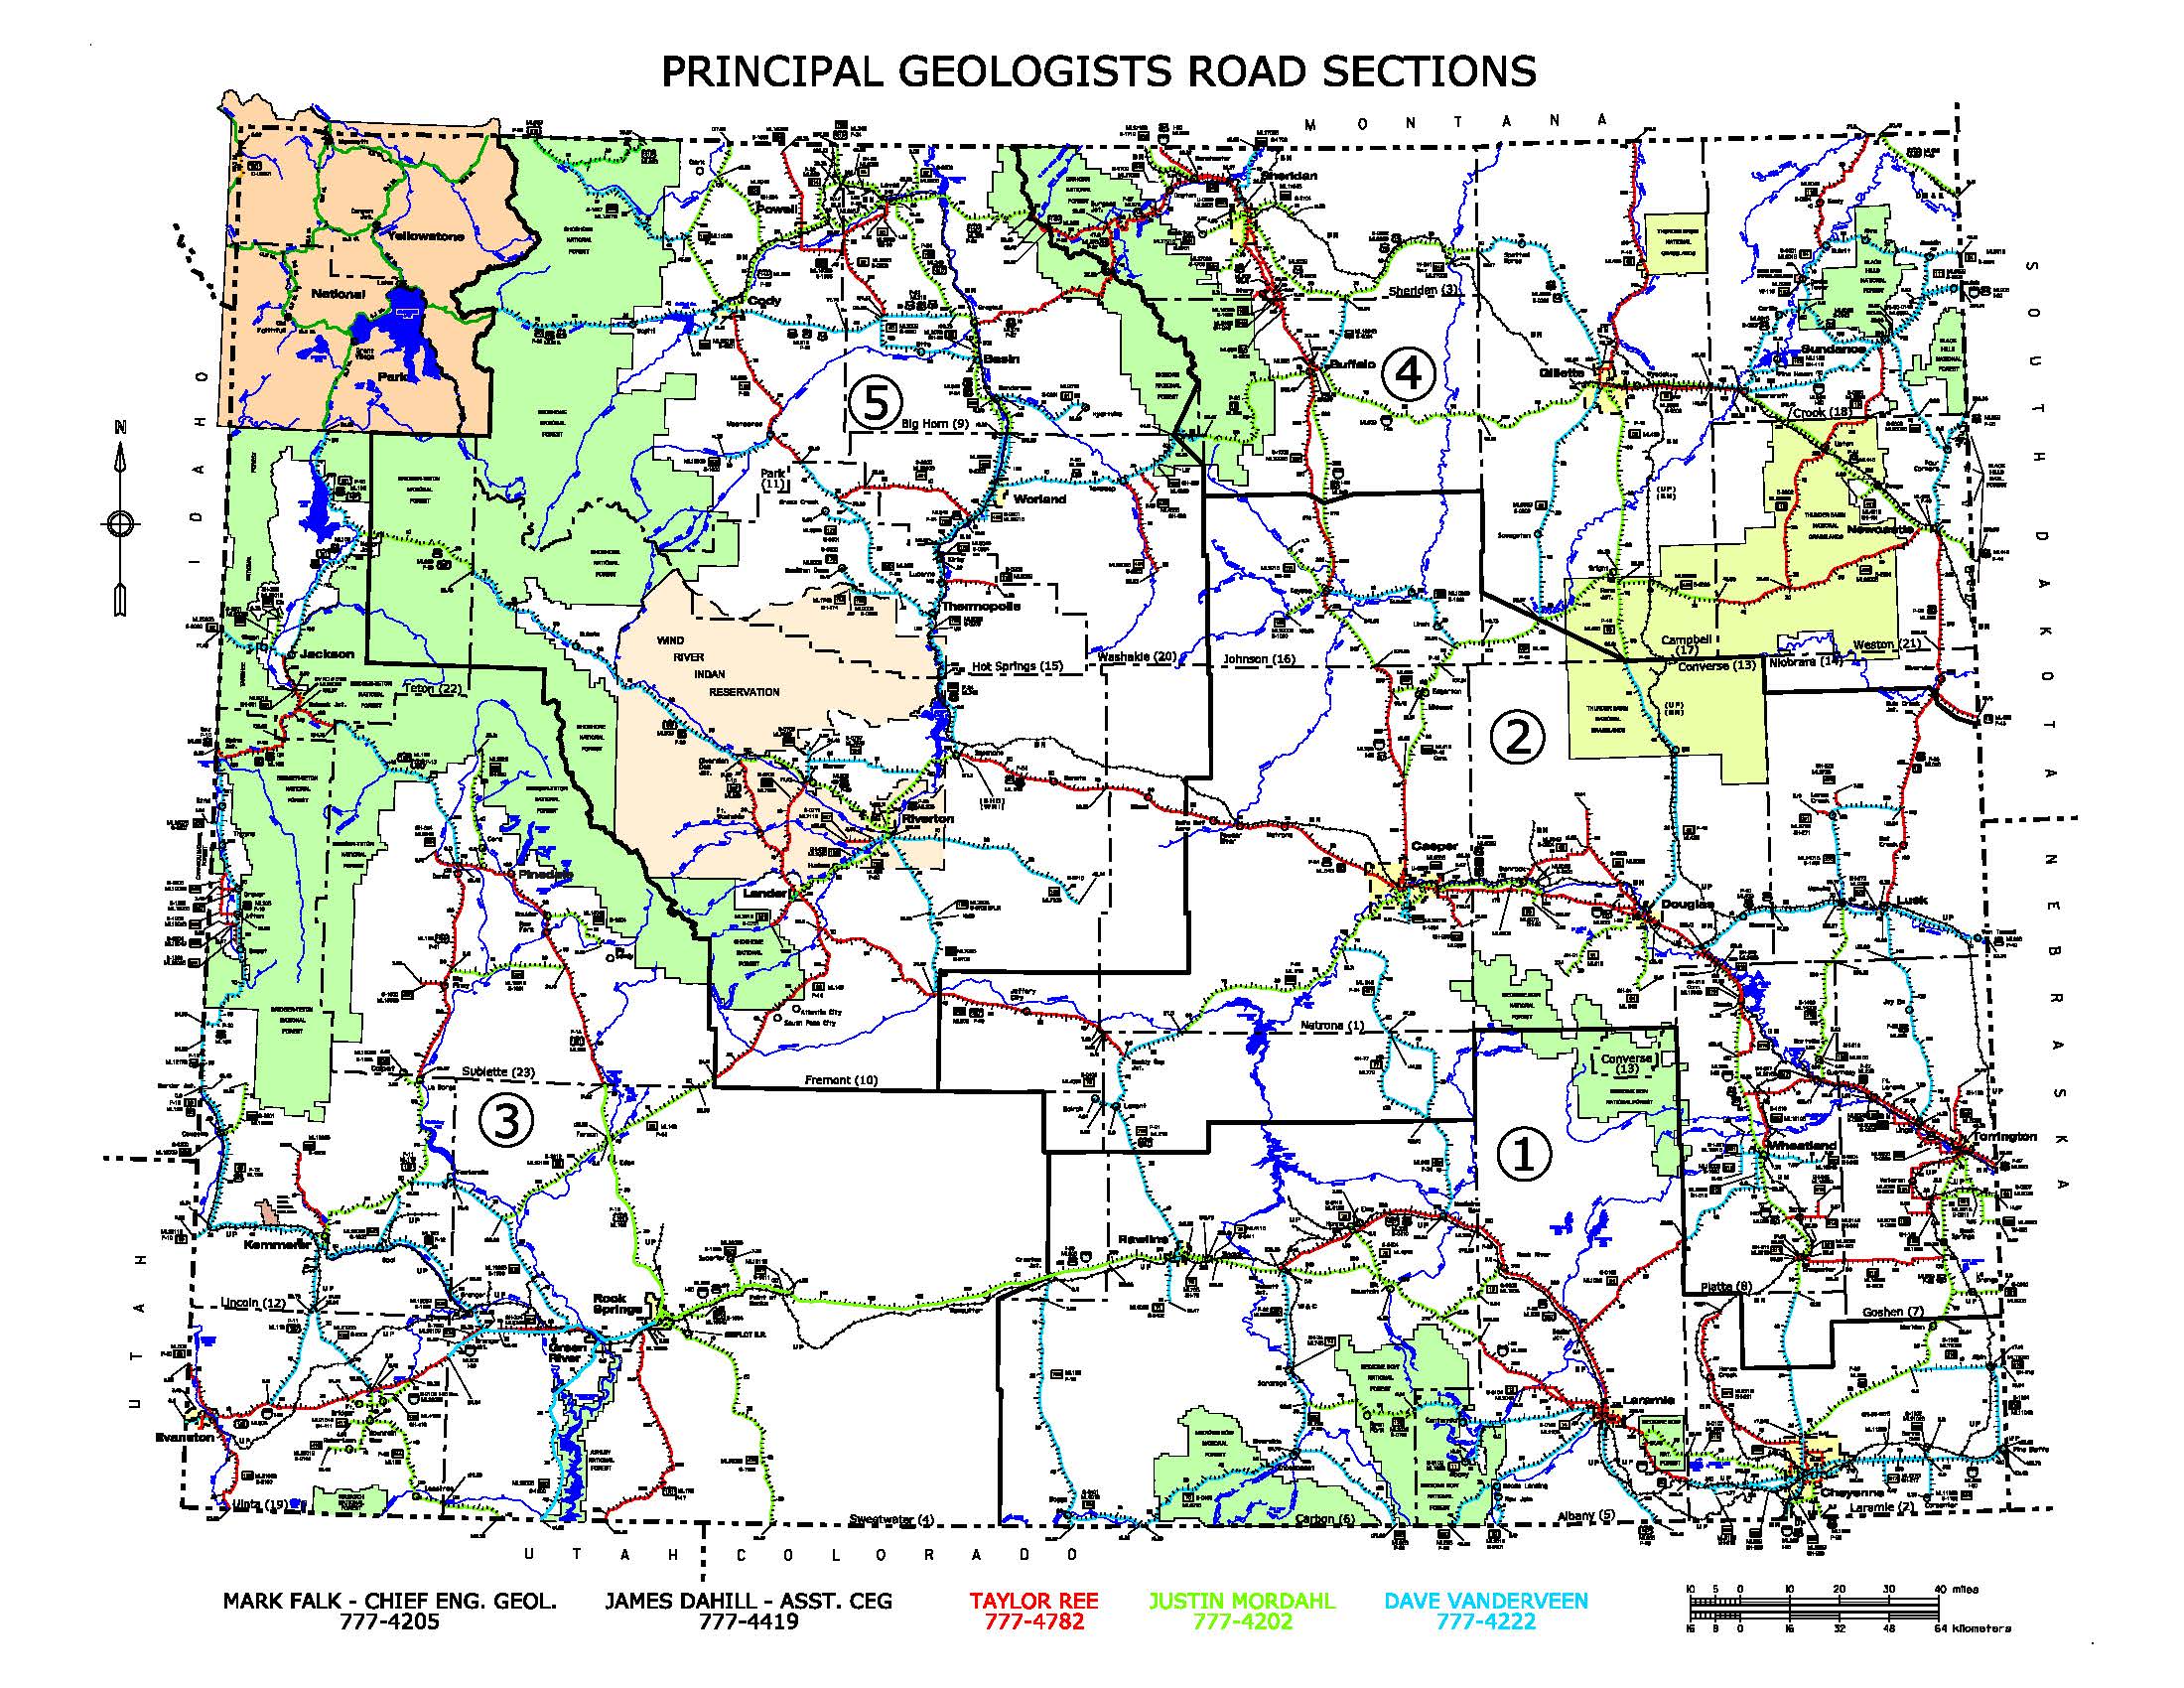 /files/live/sites/wydot/files/shared/Geology/PG%20Section%20Map%201-2023.pdf